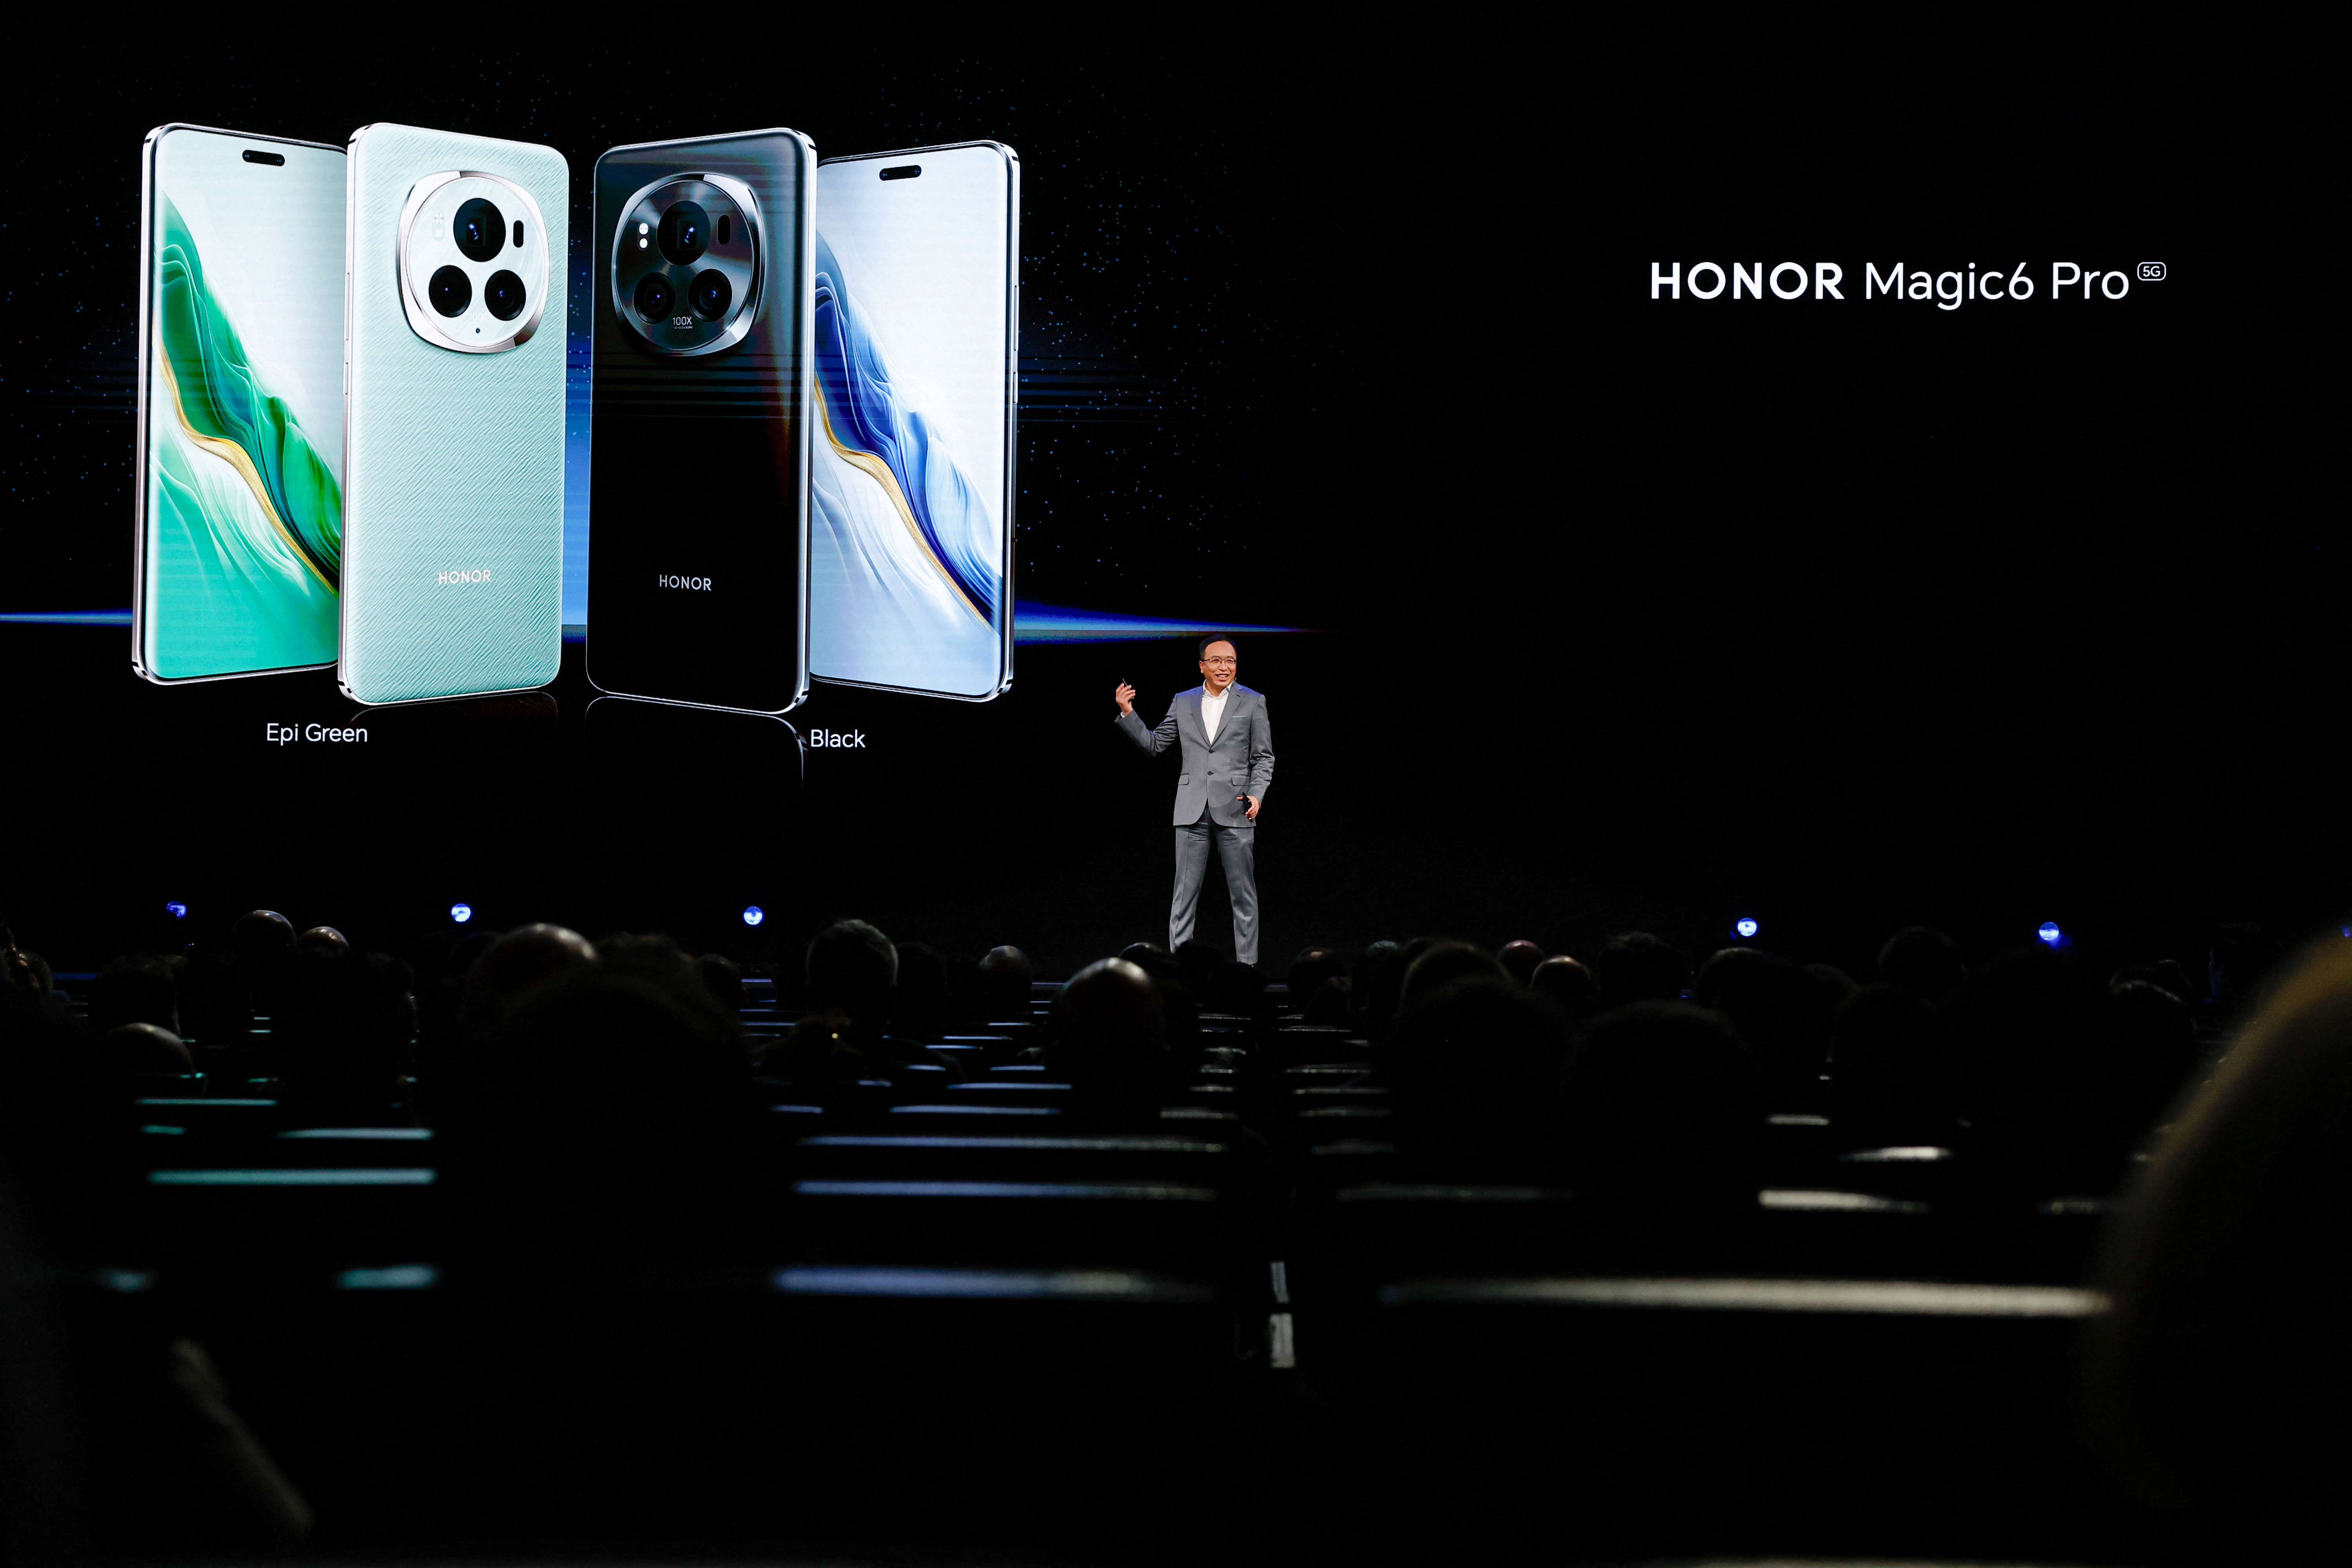 Honor Magic 6 Pro Launches Globally with AI Features